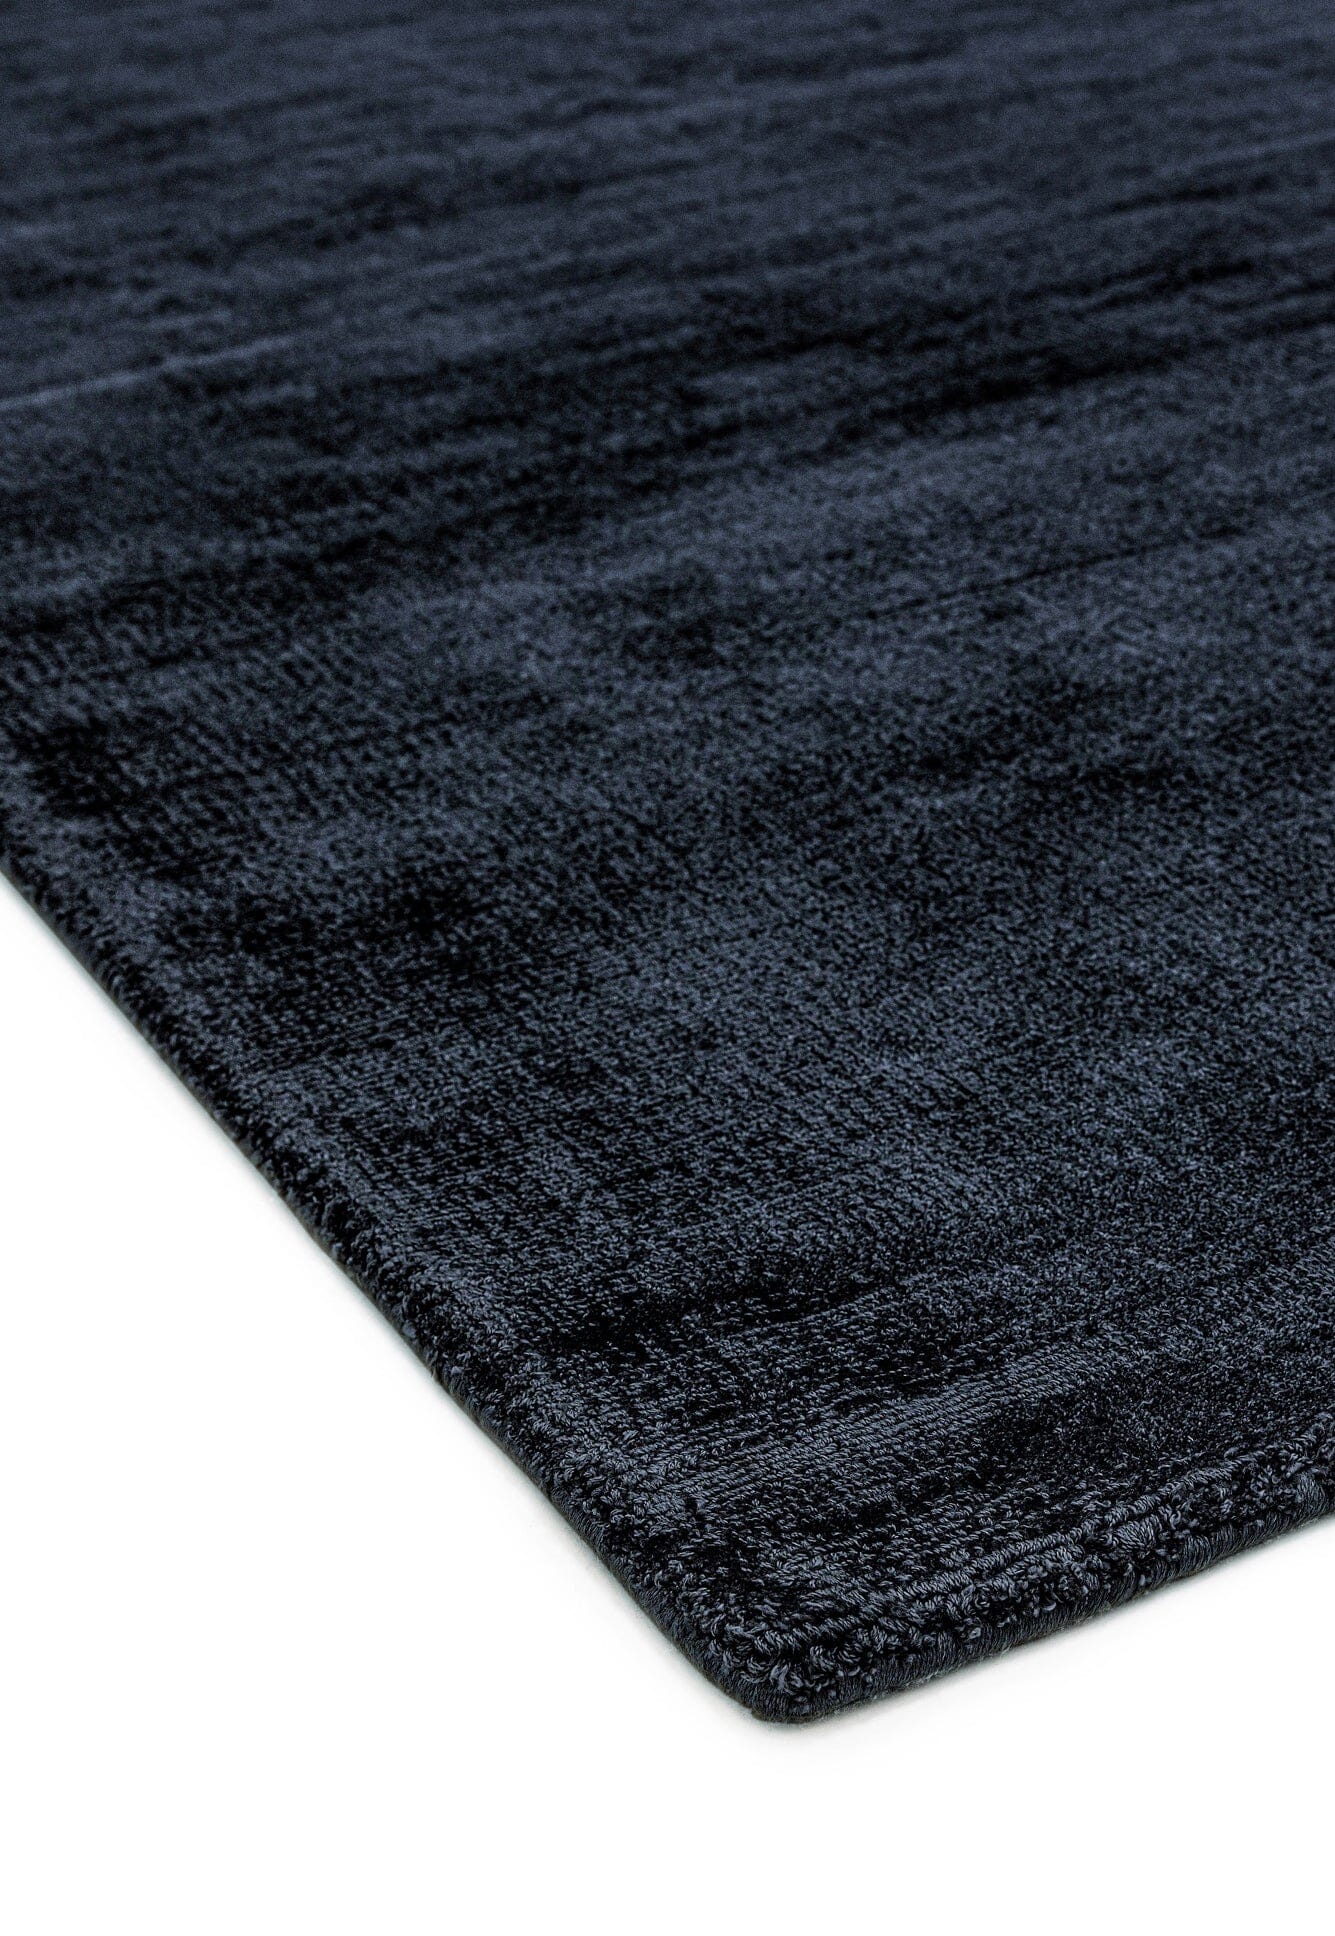  Asiatic Carpets-Asiatic Carpets Blade Hand Woven Rug Navy - 160 x 230cm-Blue 541 